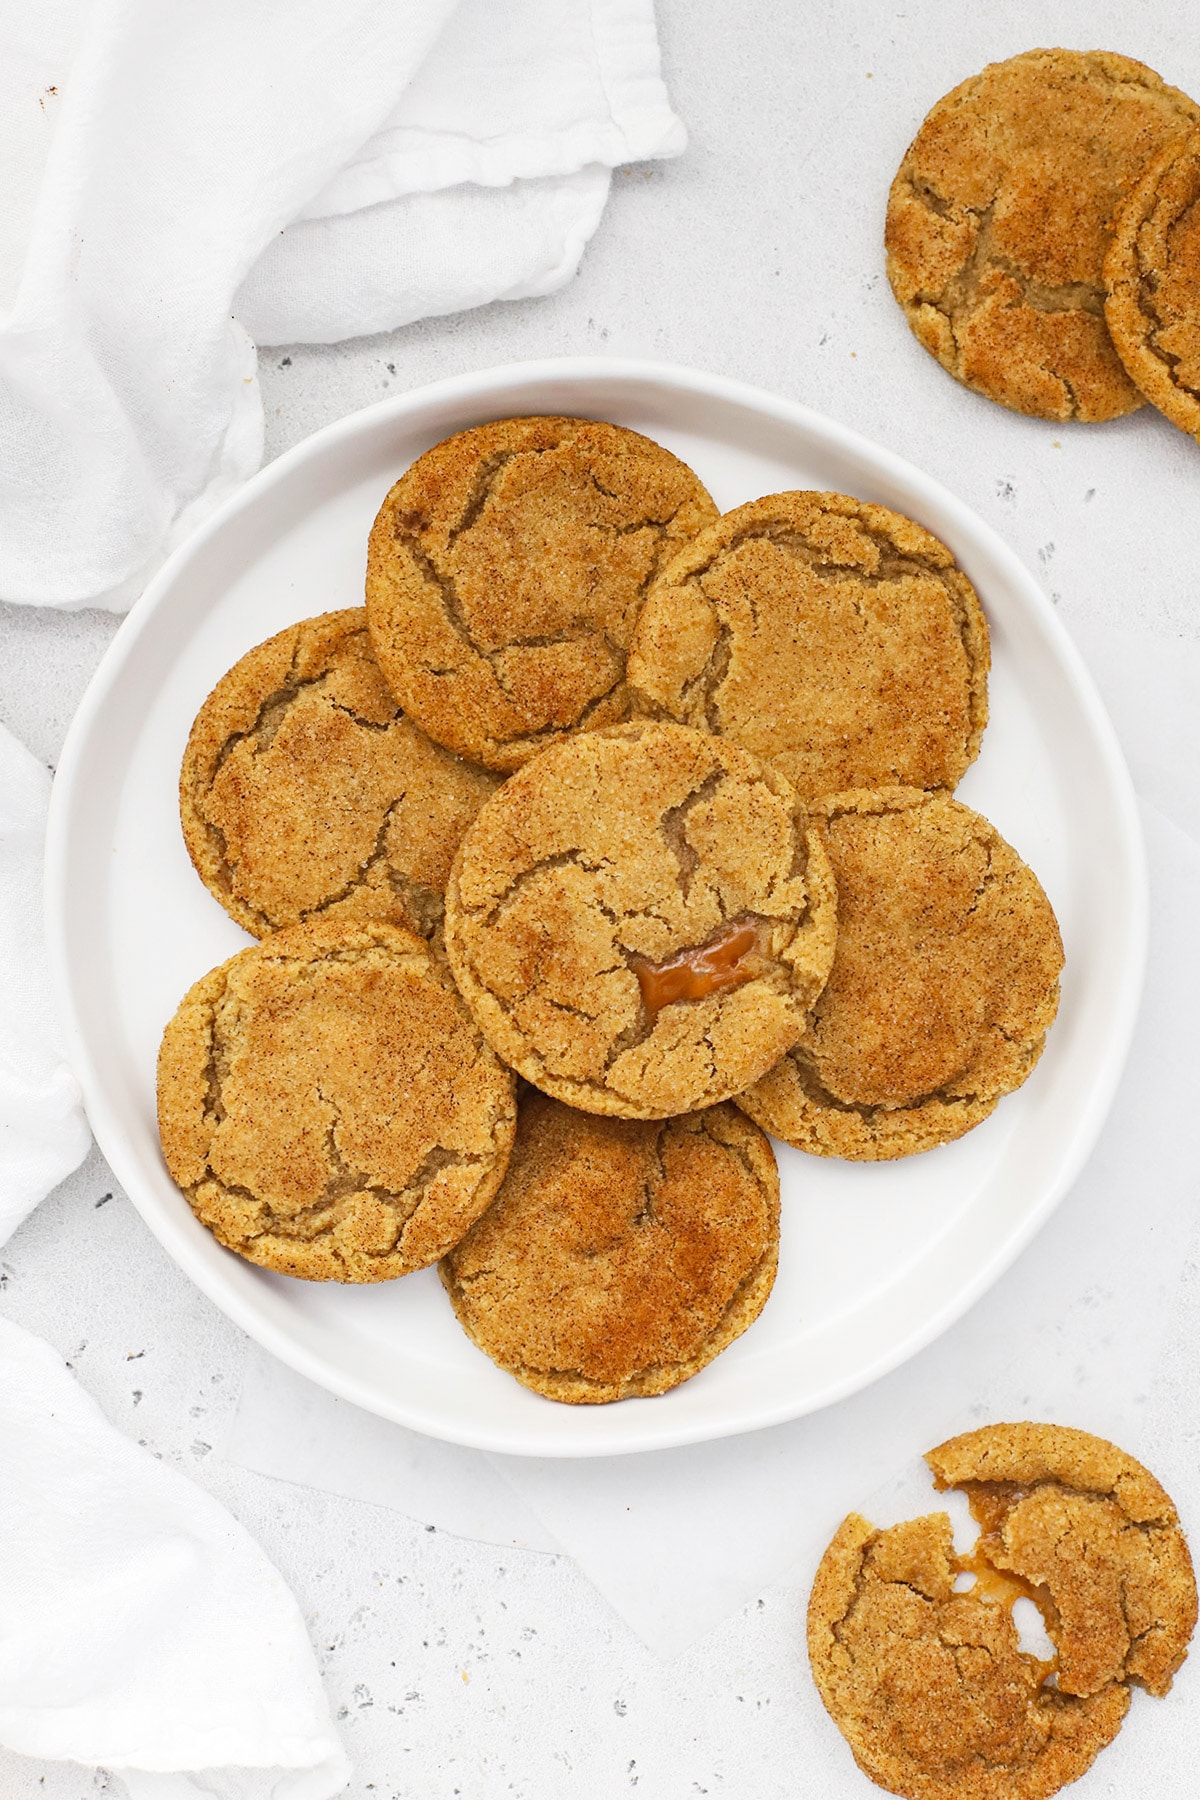 Overhead view of a plate of gluten-free brown butter caramel snickerdoodles